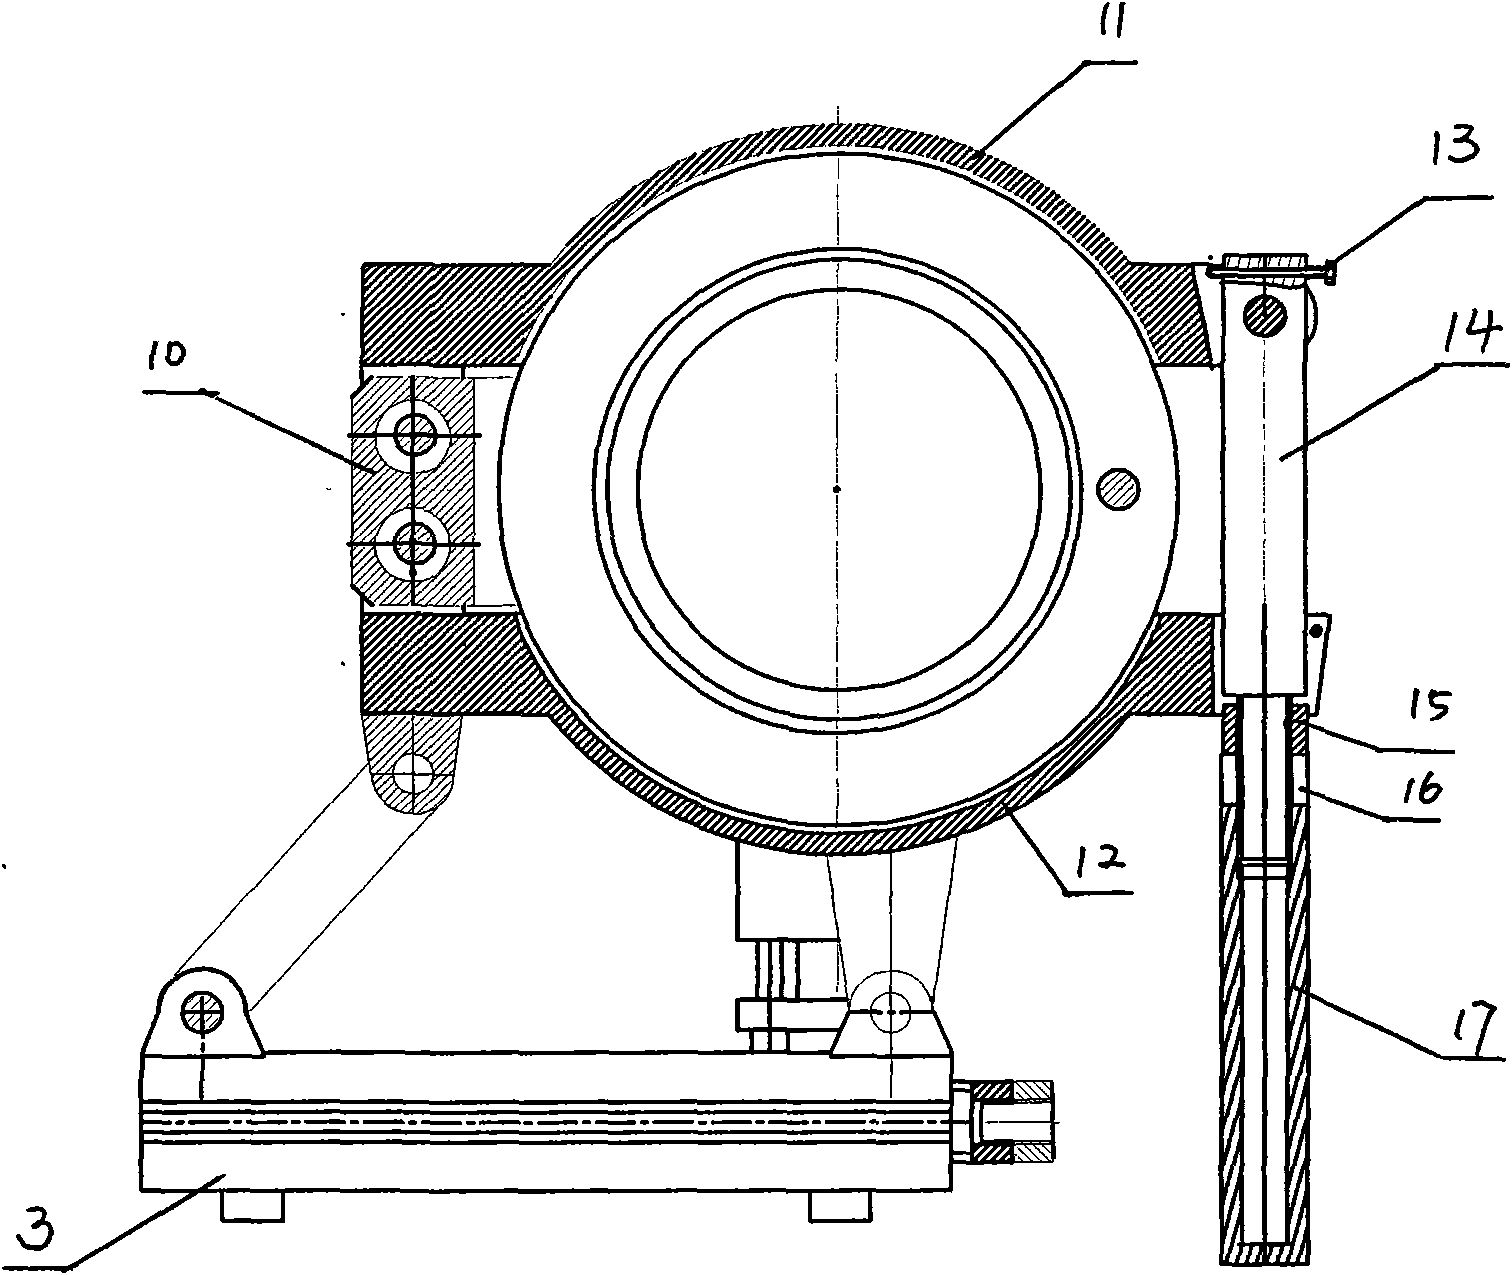 Emergency separating device for liquid transmission